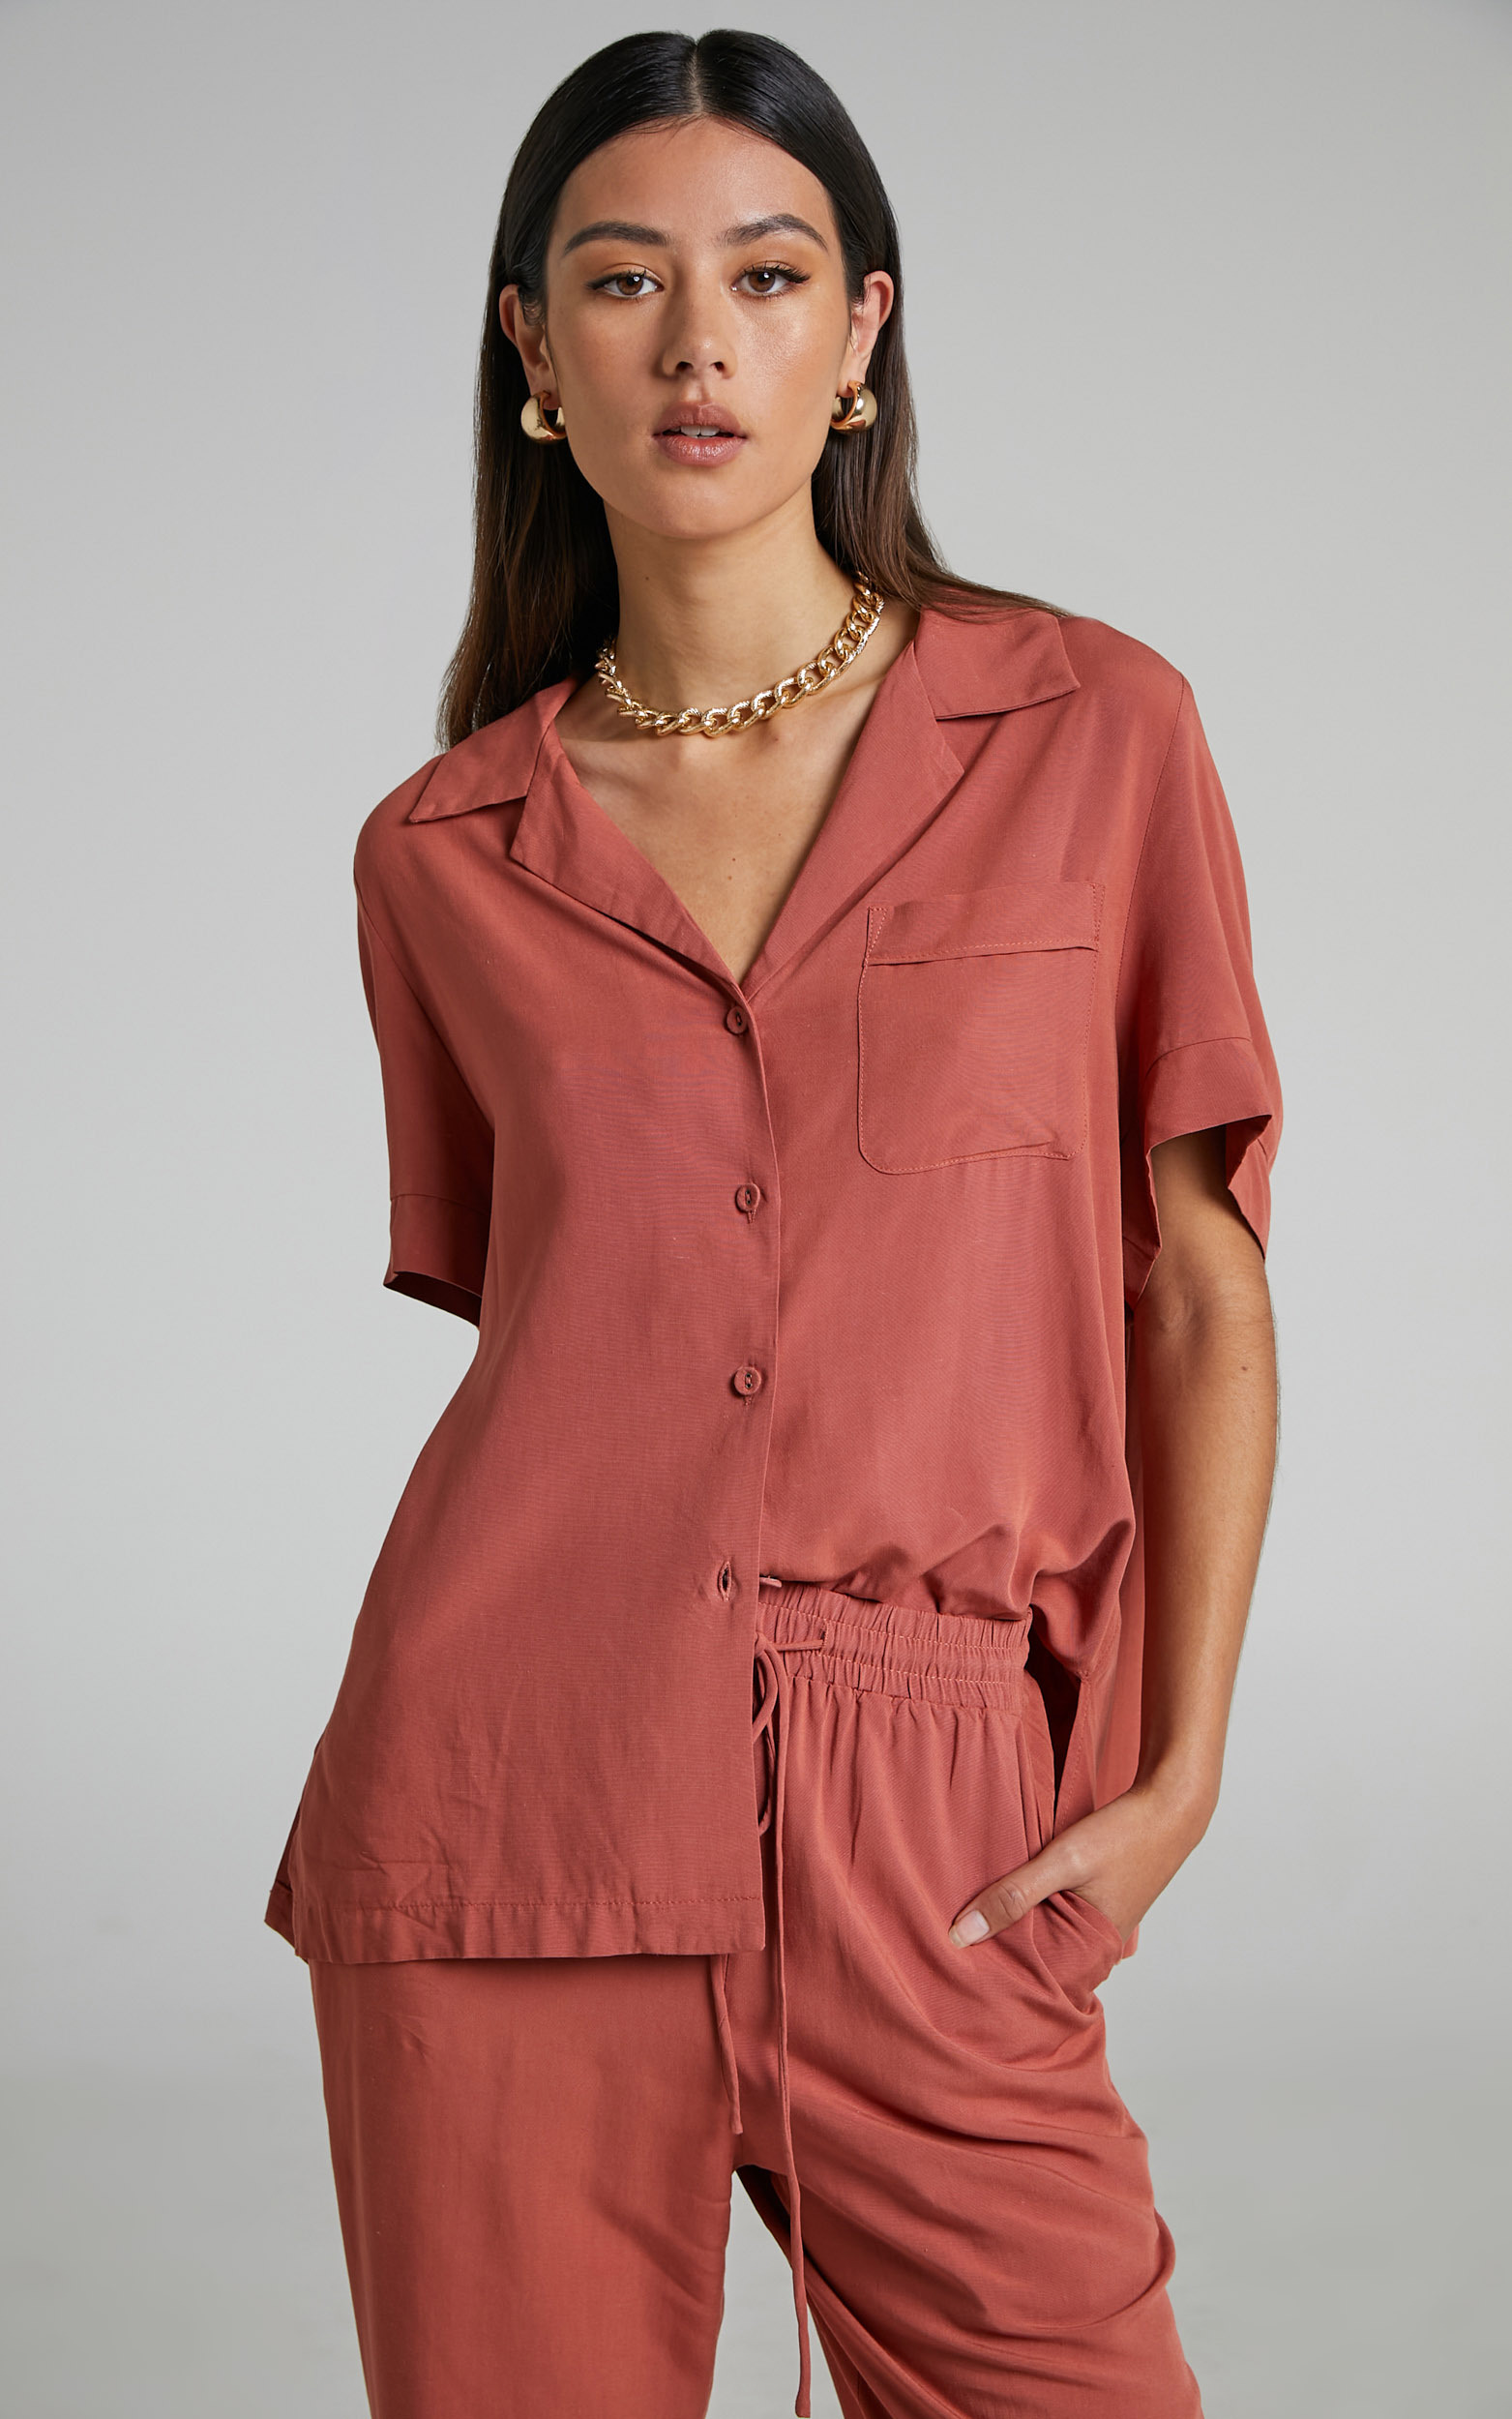 Devina Short Sleeve Shirt in Clay - 06, BRN1, hi-res image number null